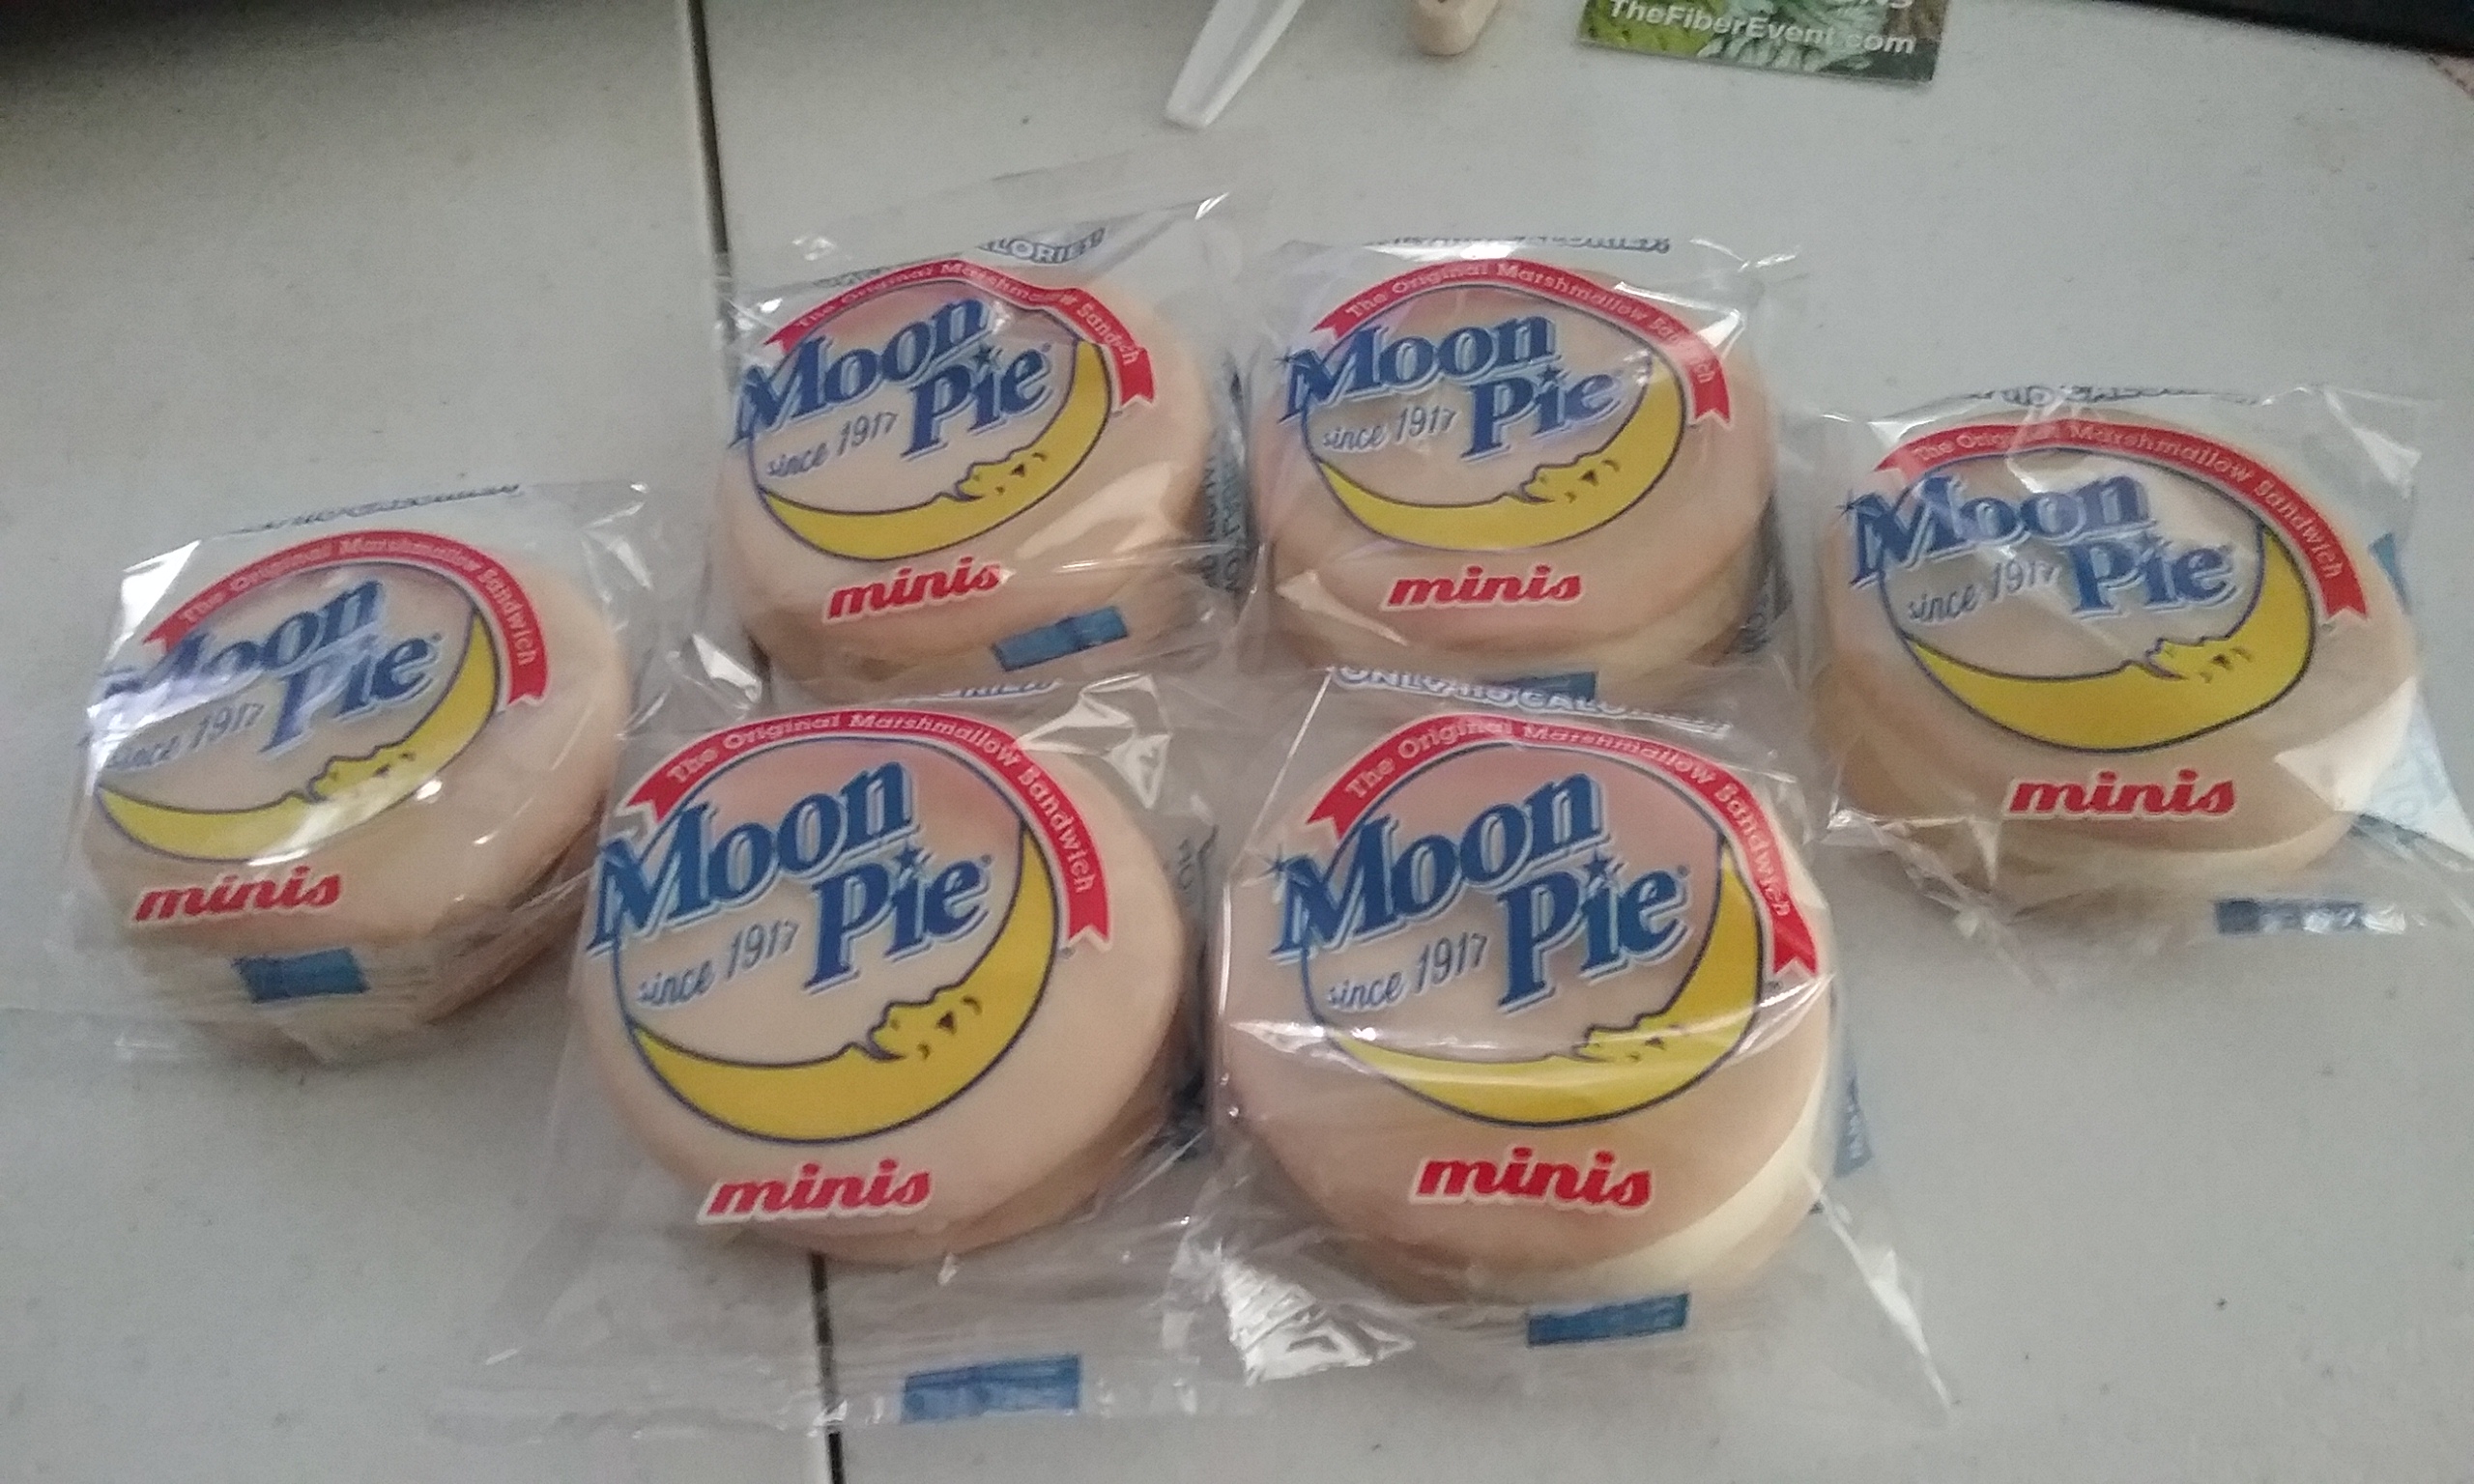 the Moon Pie minis that I bought at the Family Dollar store